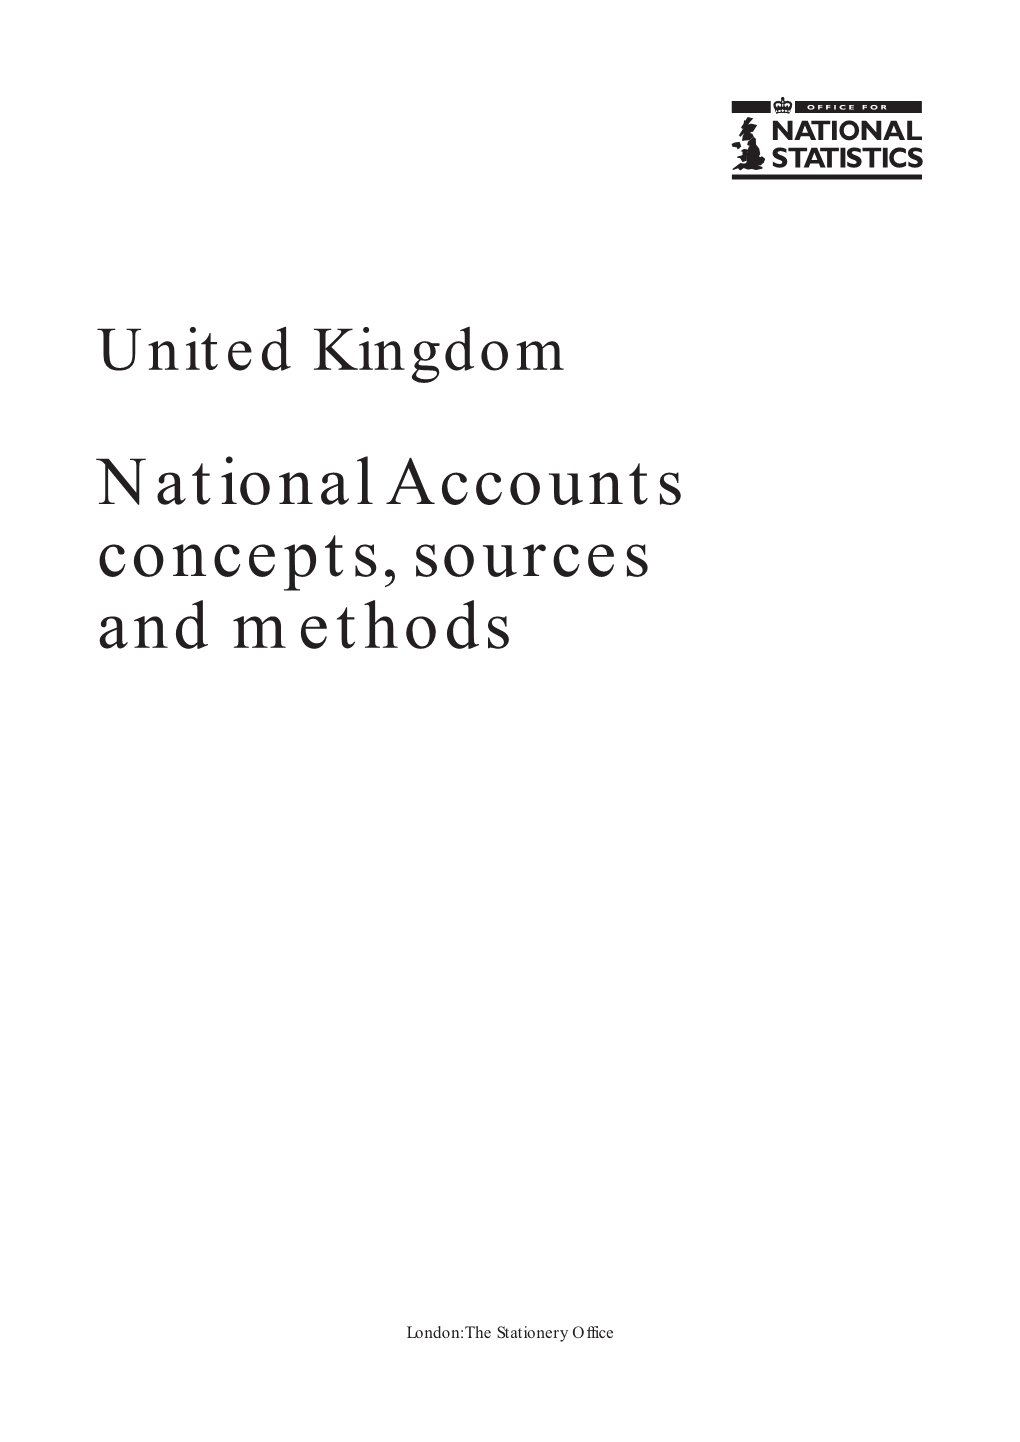 National Accounts: Concepts, Sources and Methods